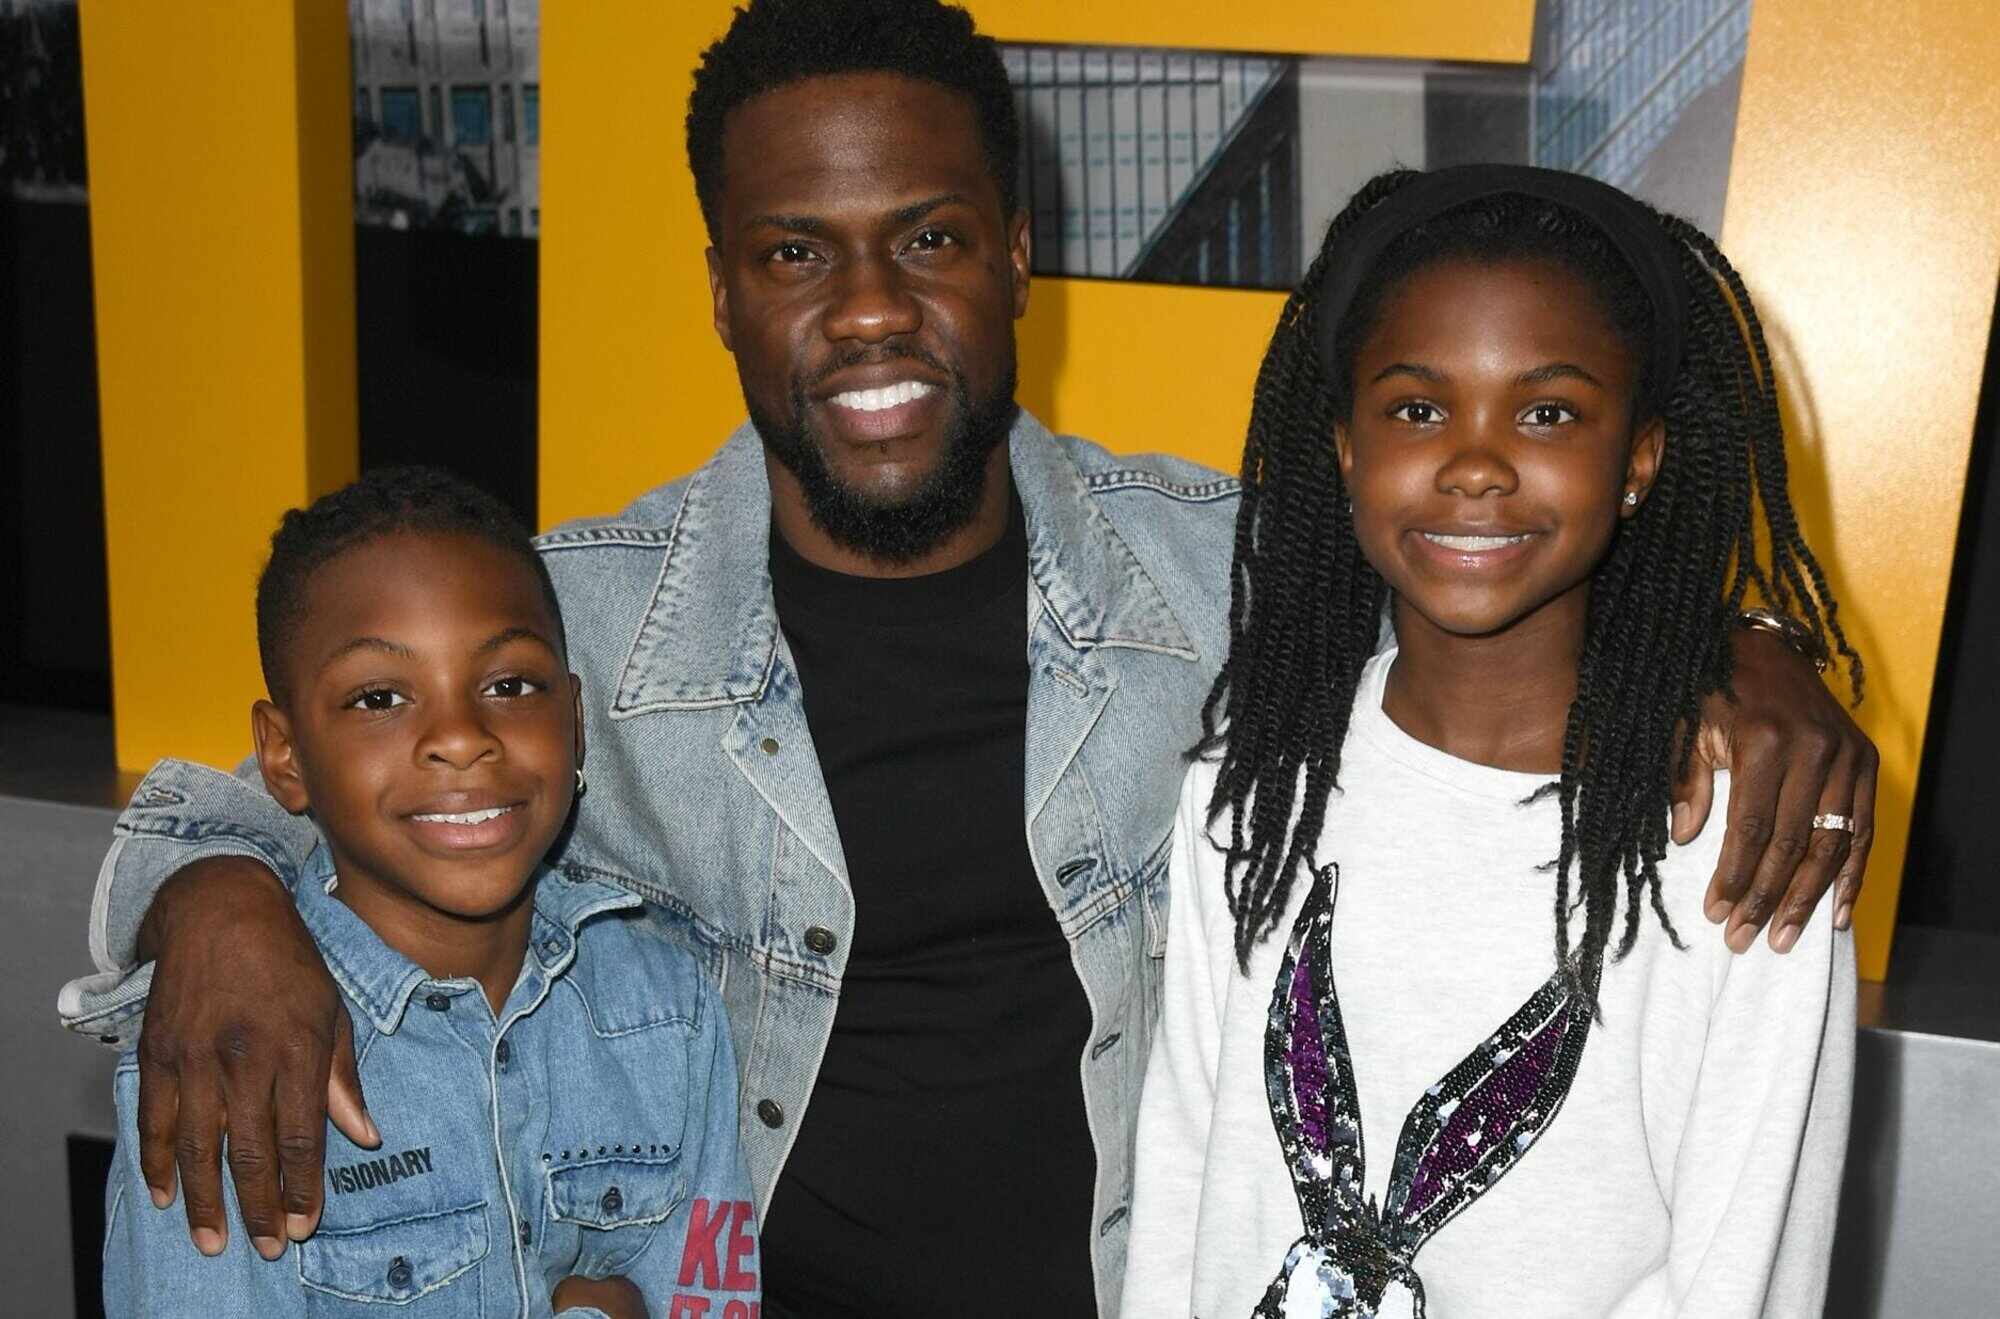 Kevin Hart's journey from The Laff House to a global comedy sensation is nothing short of remarkable.